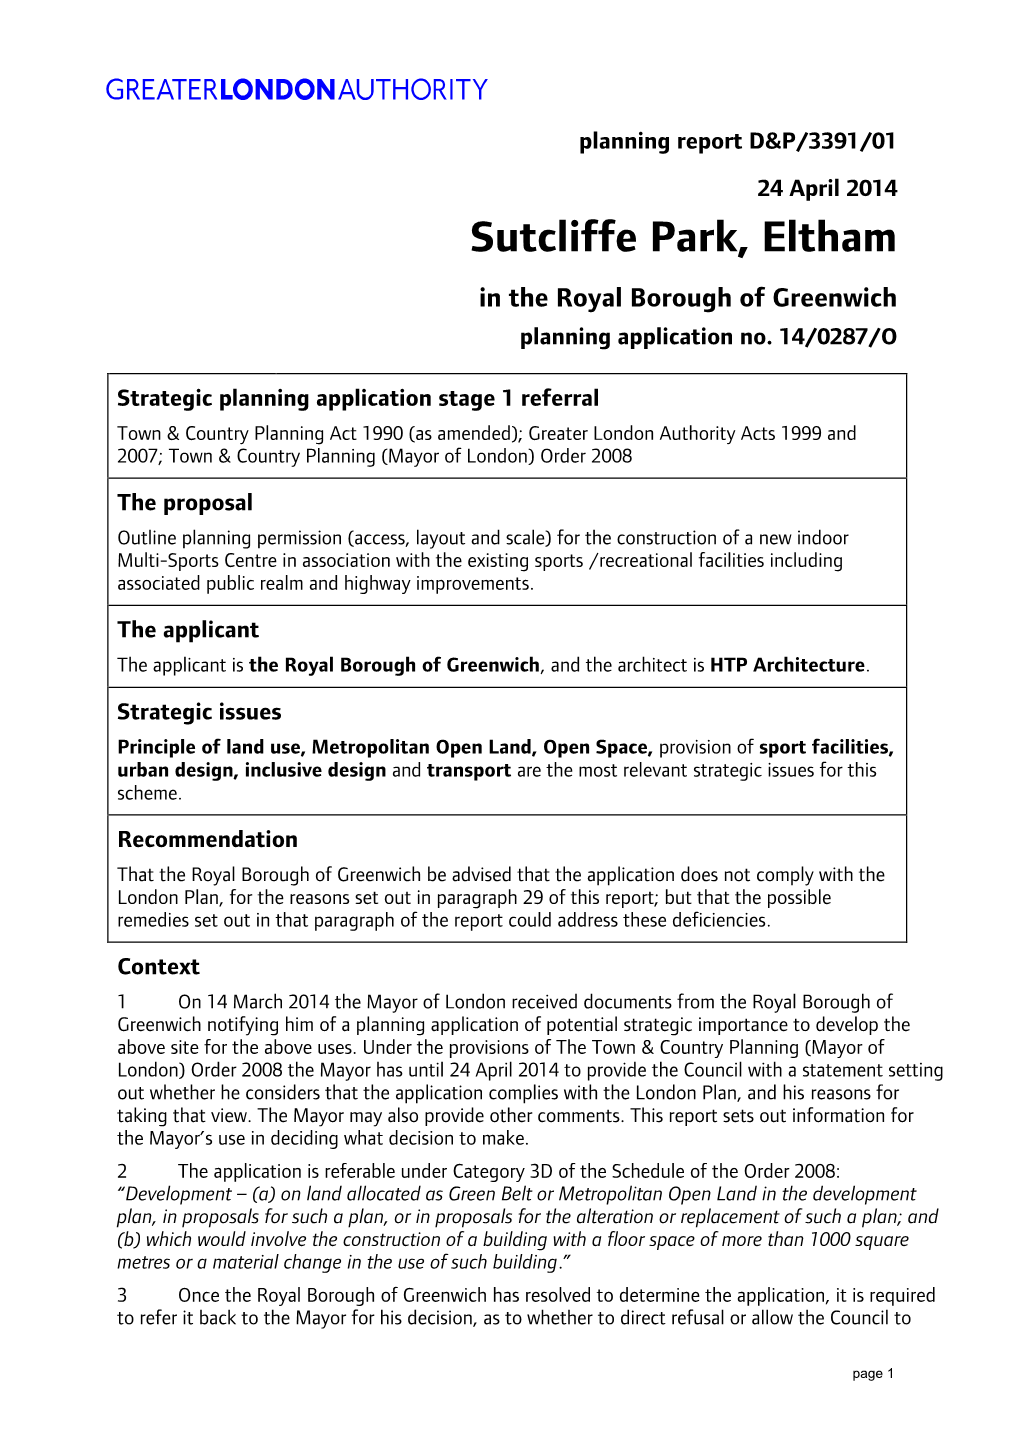 Sutcliffe Park, Eltham in the Royal Borough of Greenwich Planning Application No